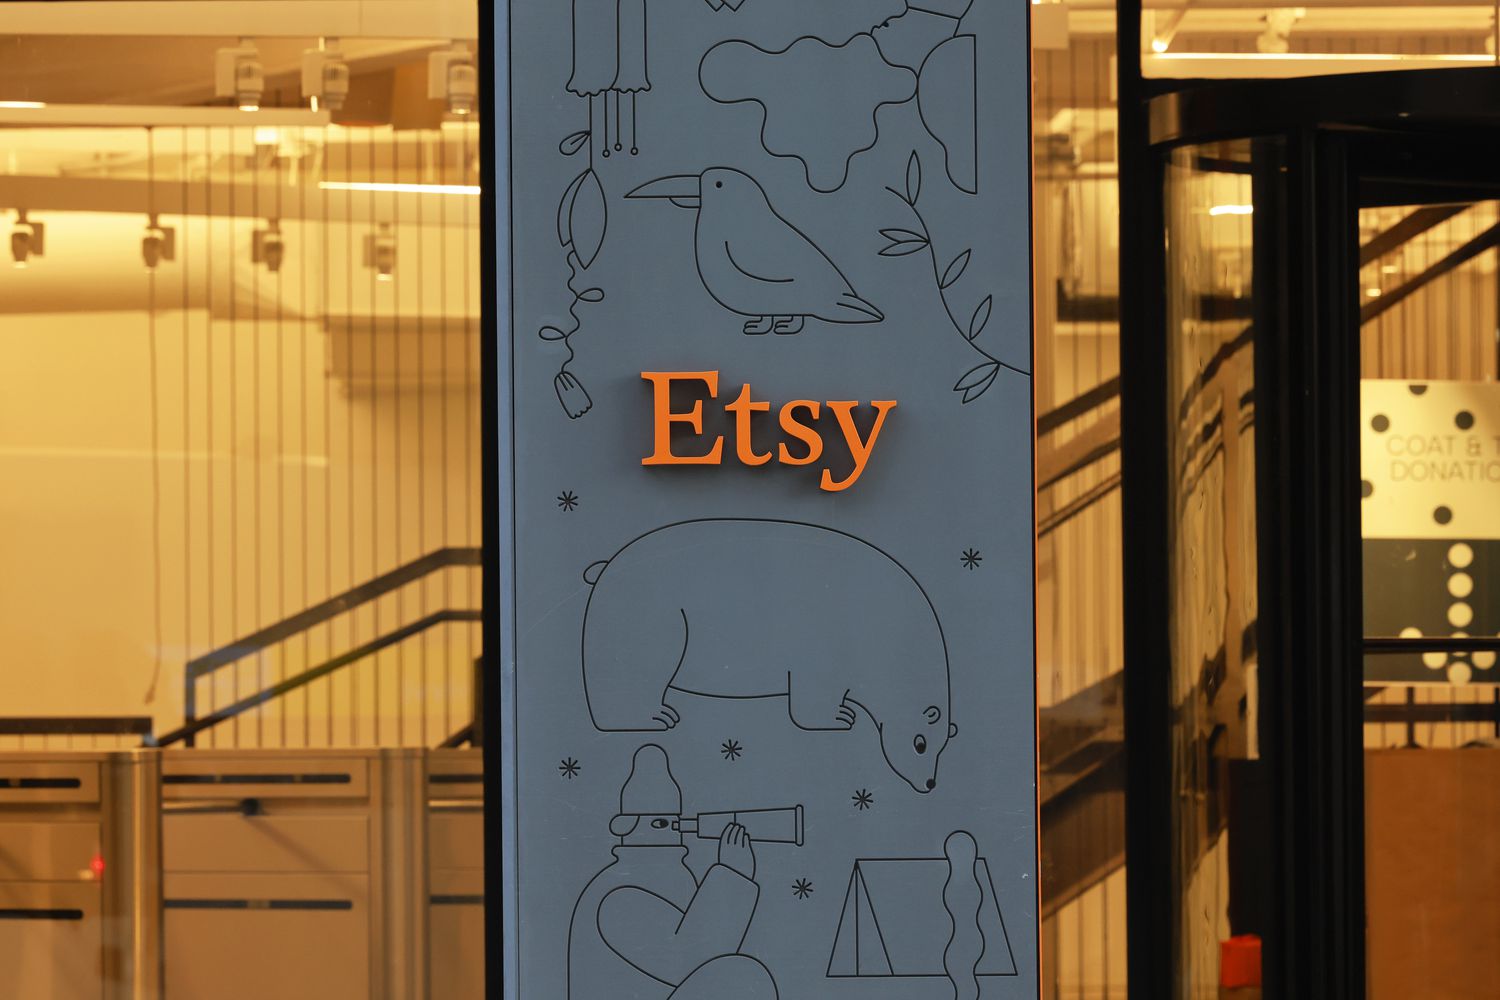 Etsy Stock Dives as Retailer Warns of ‘Challenging Environment’ for Consumer Spending [Video]